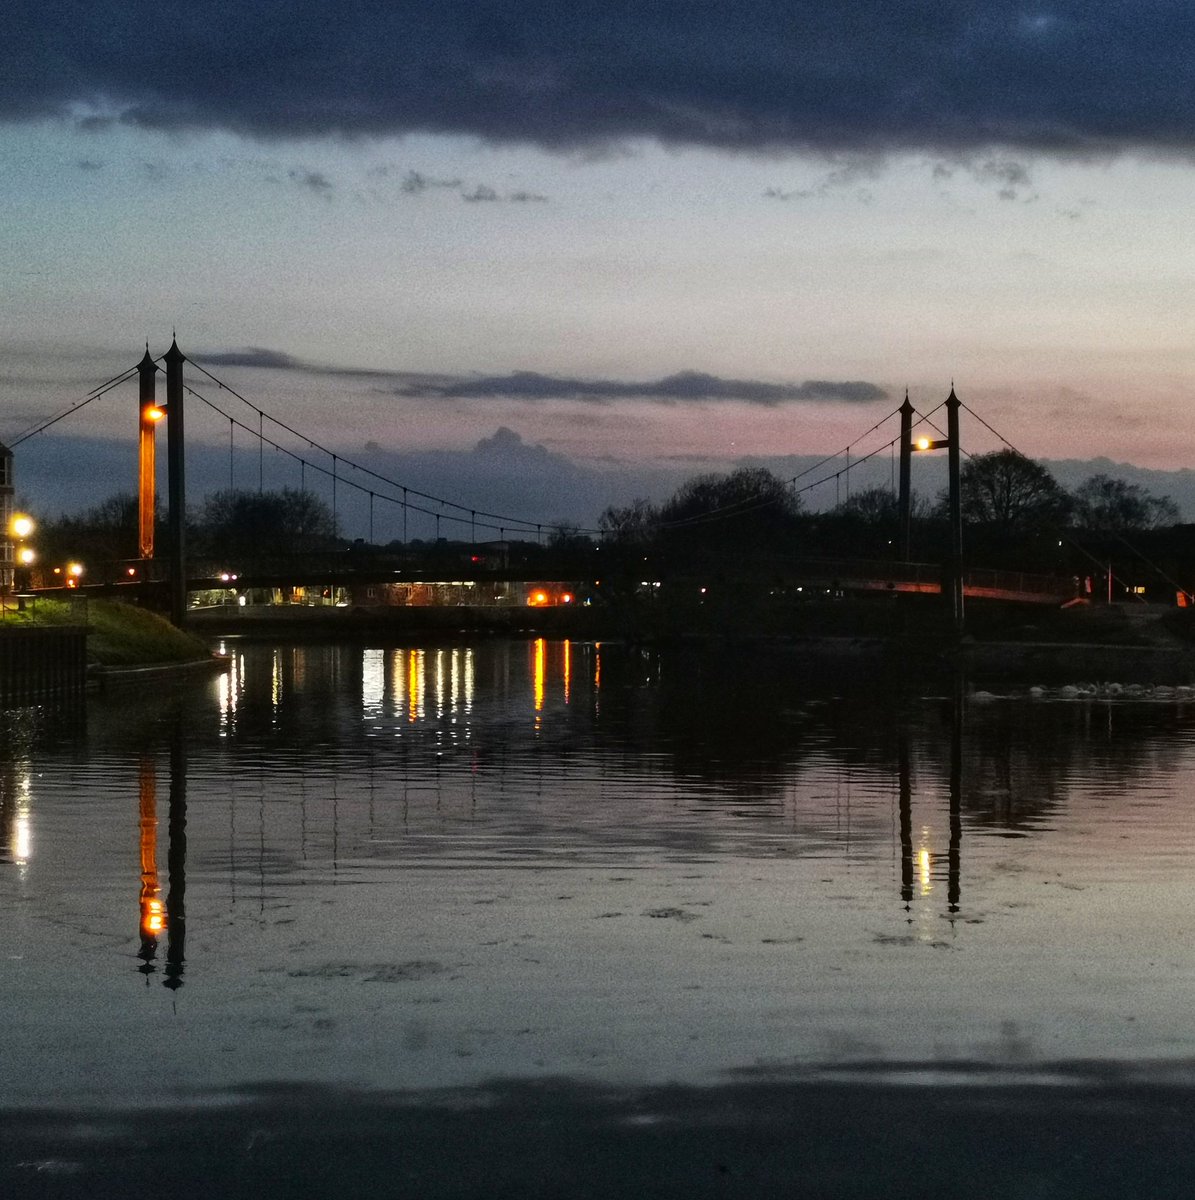 Magical #RiverExe on the Quay at dusk #Exeter